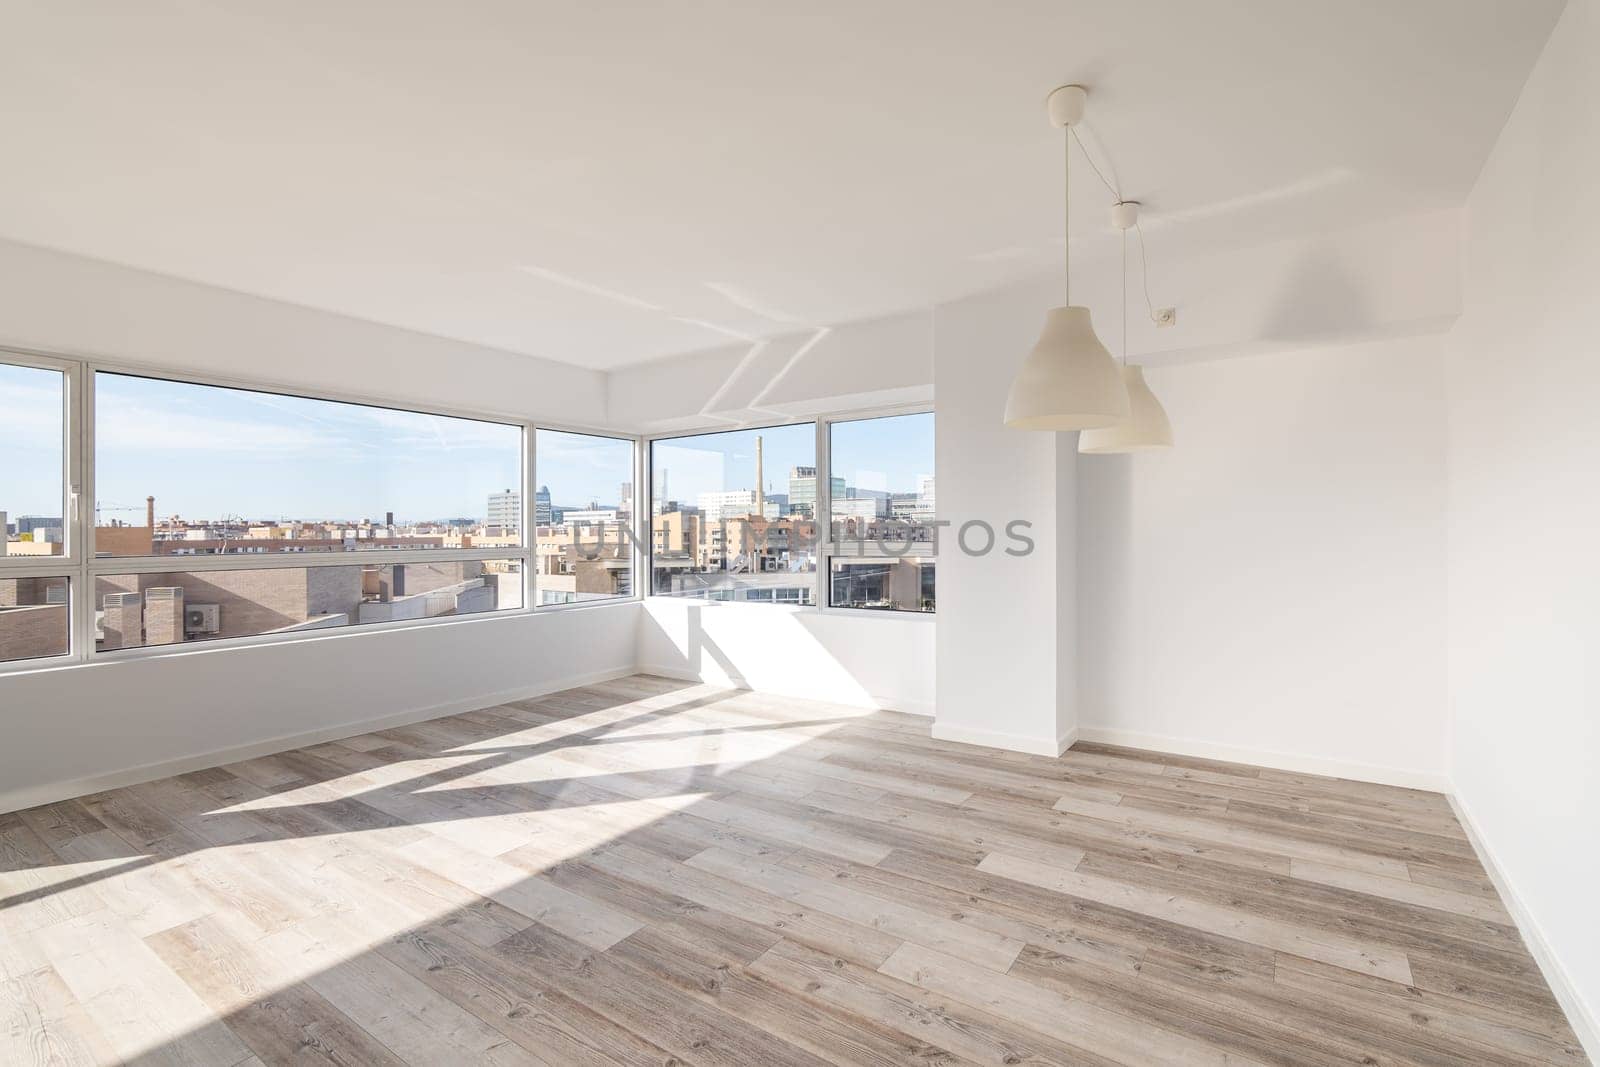 Spacious empty room with windows overlooking Barcelona by apavlin